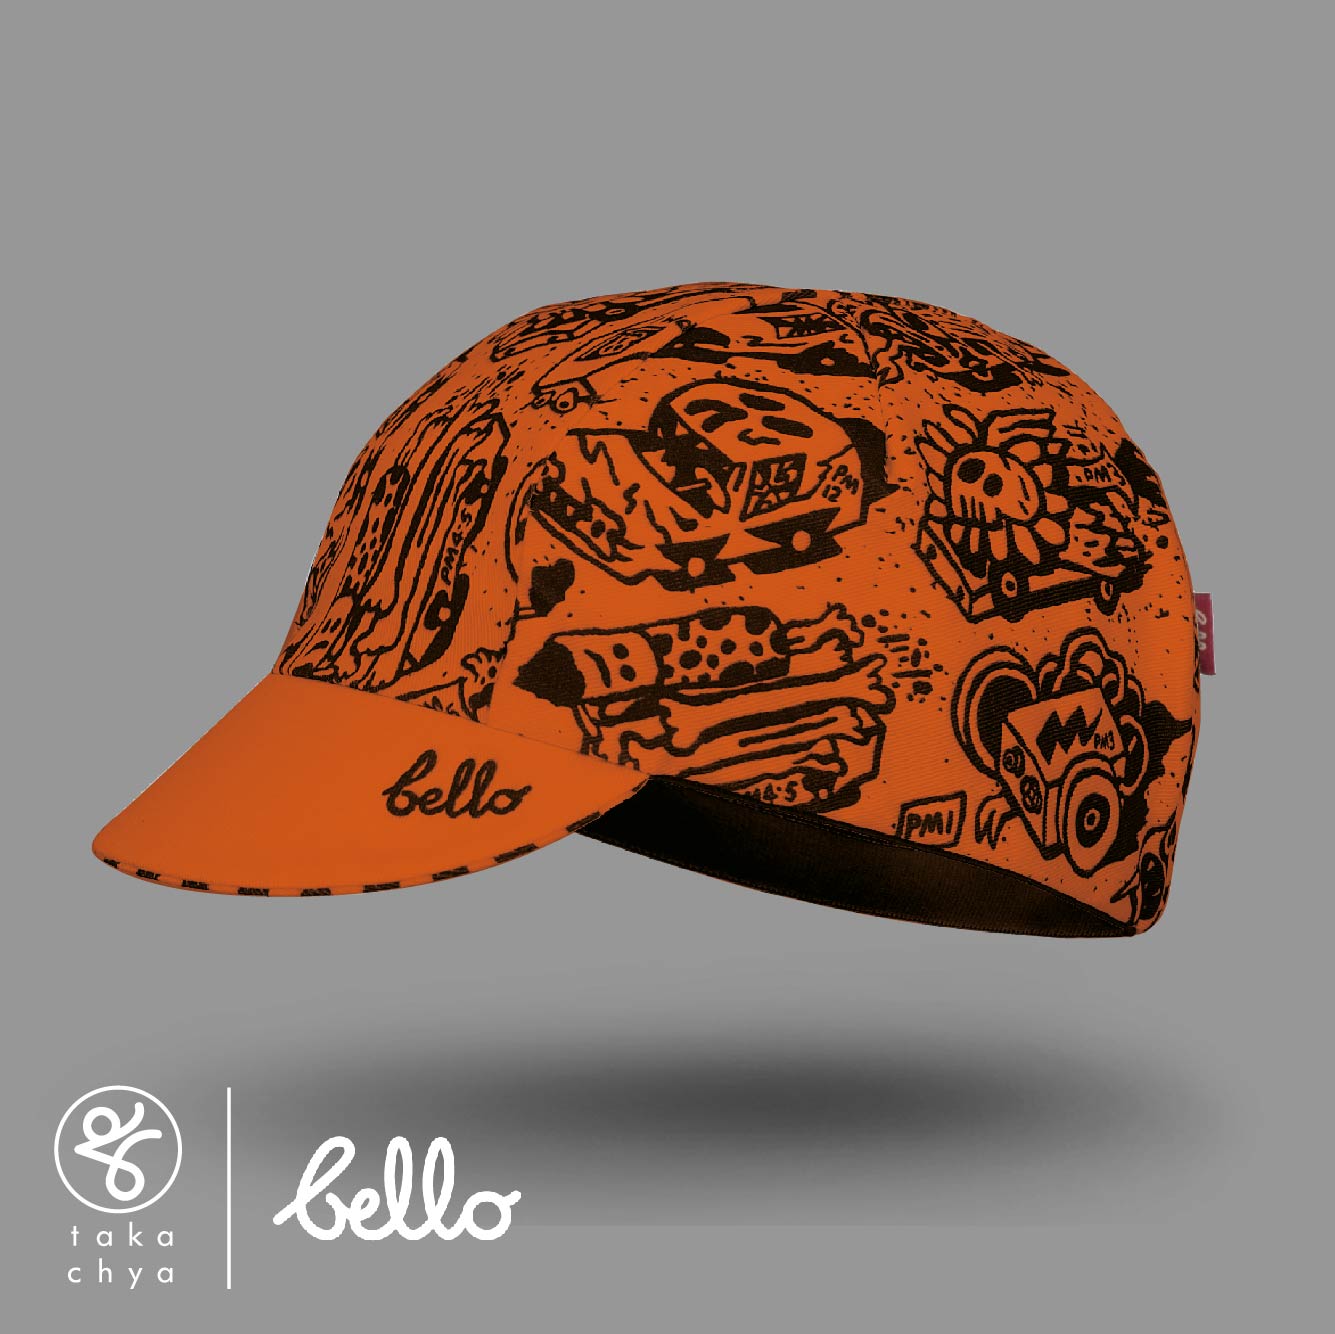 Jody Barton with AIR–INK® (6 COLORS) - Bello Cyclist Designer Collaboration Cycling Cap